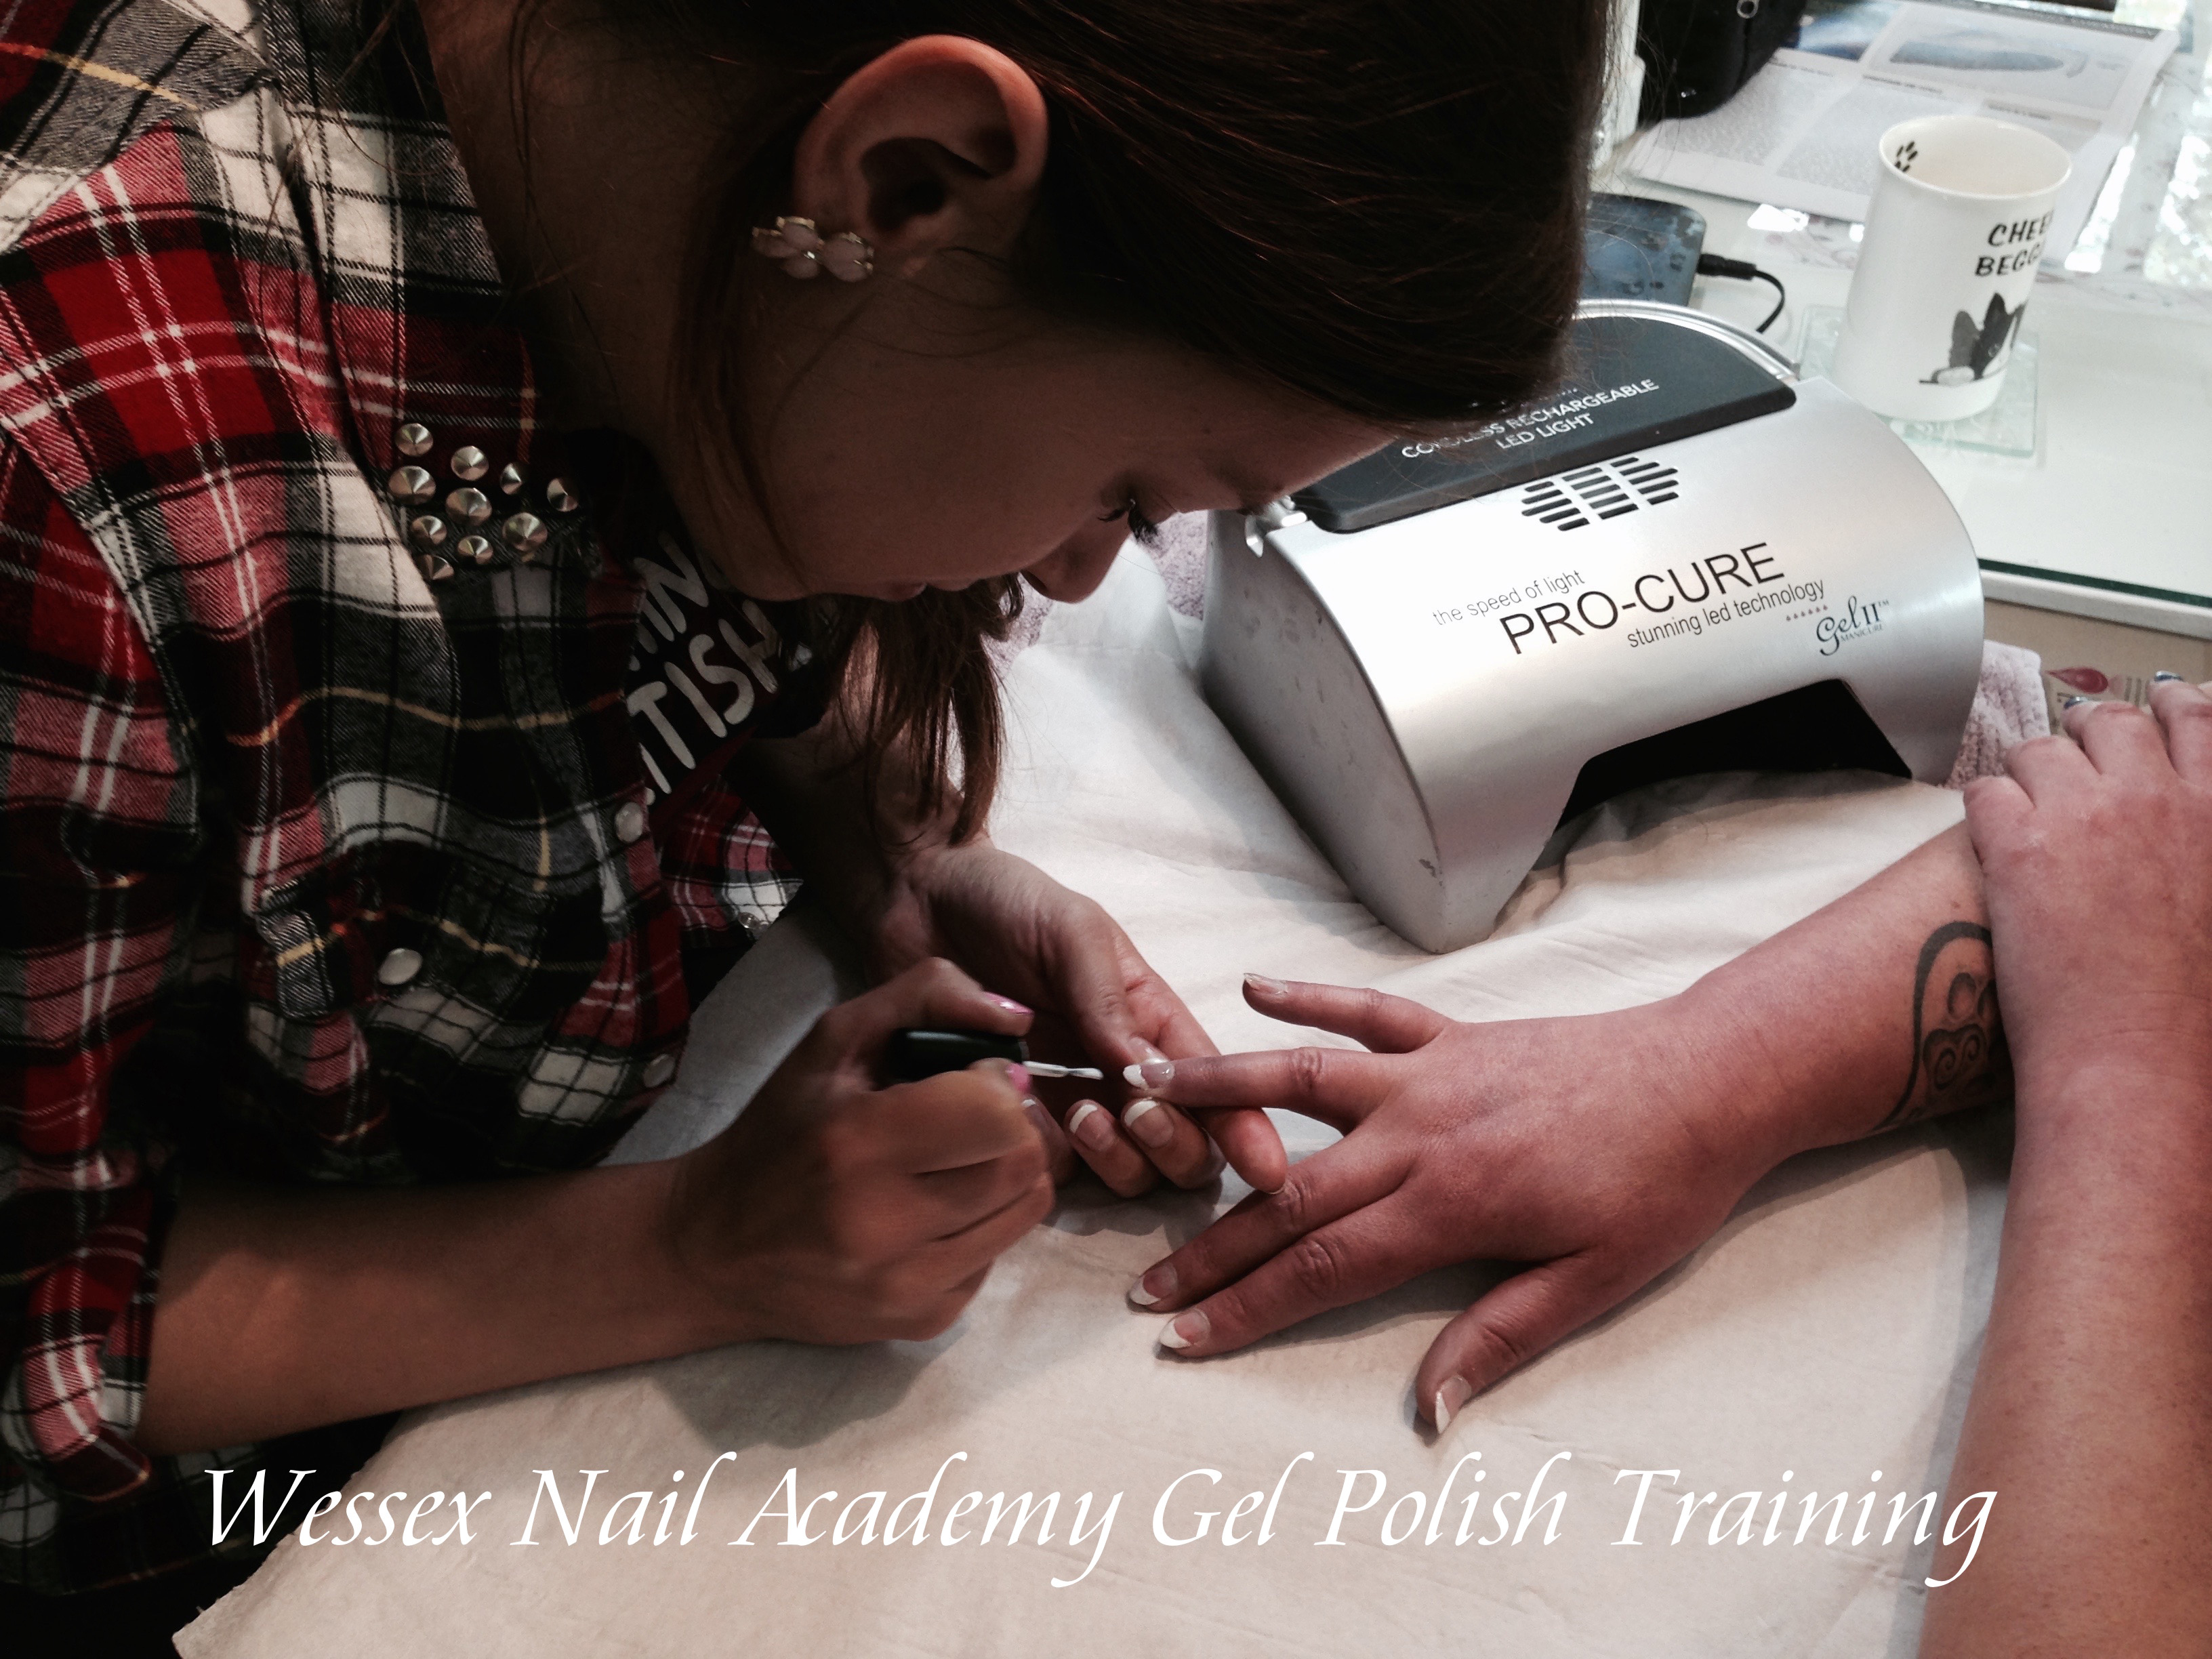 Gel Polish Beginners Manicure and Pedicure Nail Technicians Course, Nail extension training, nail training course, Wessex Nail Academy Okeford Fitzpaine, Dorset